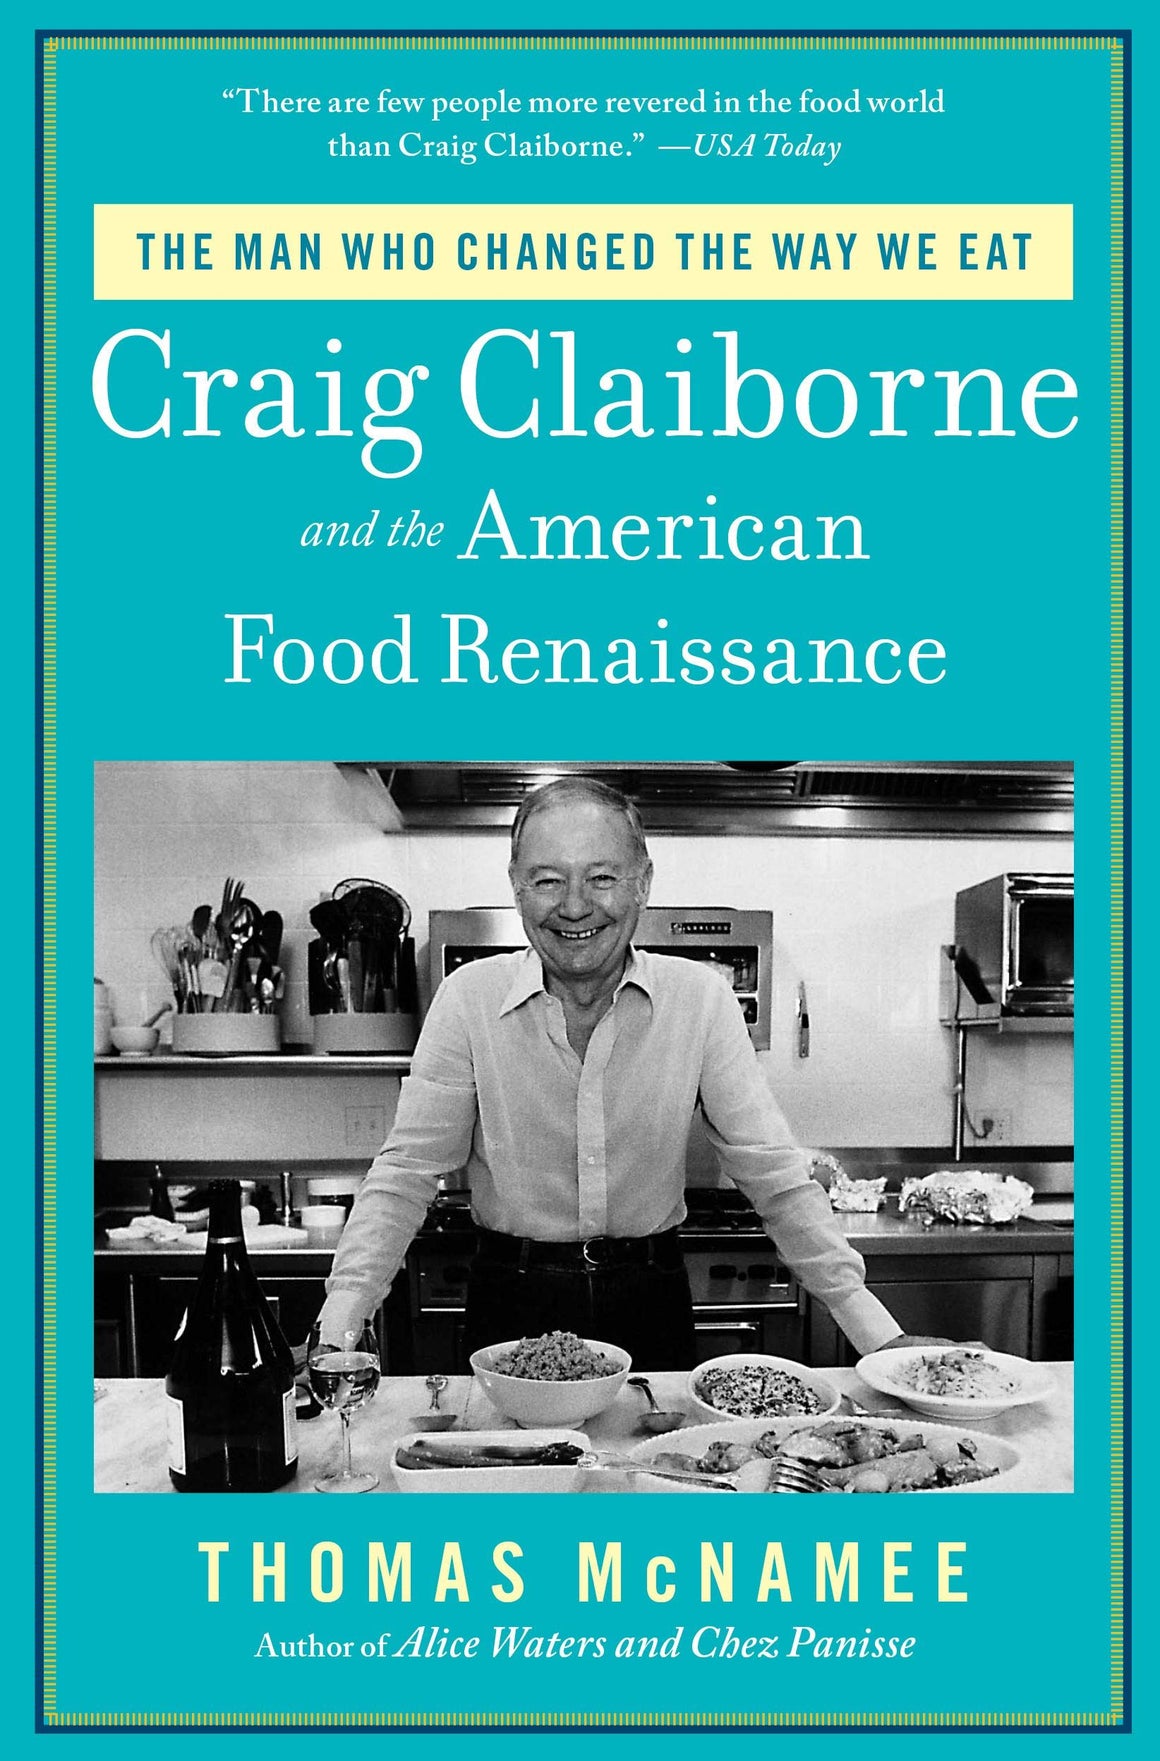 The Man Who Changed the Way We Eat: Craig Claiborne and the American Food Renaissance (Thomas McNamee)